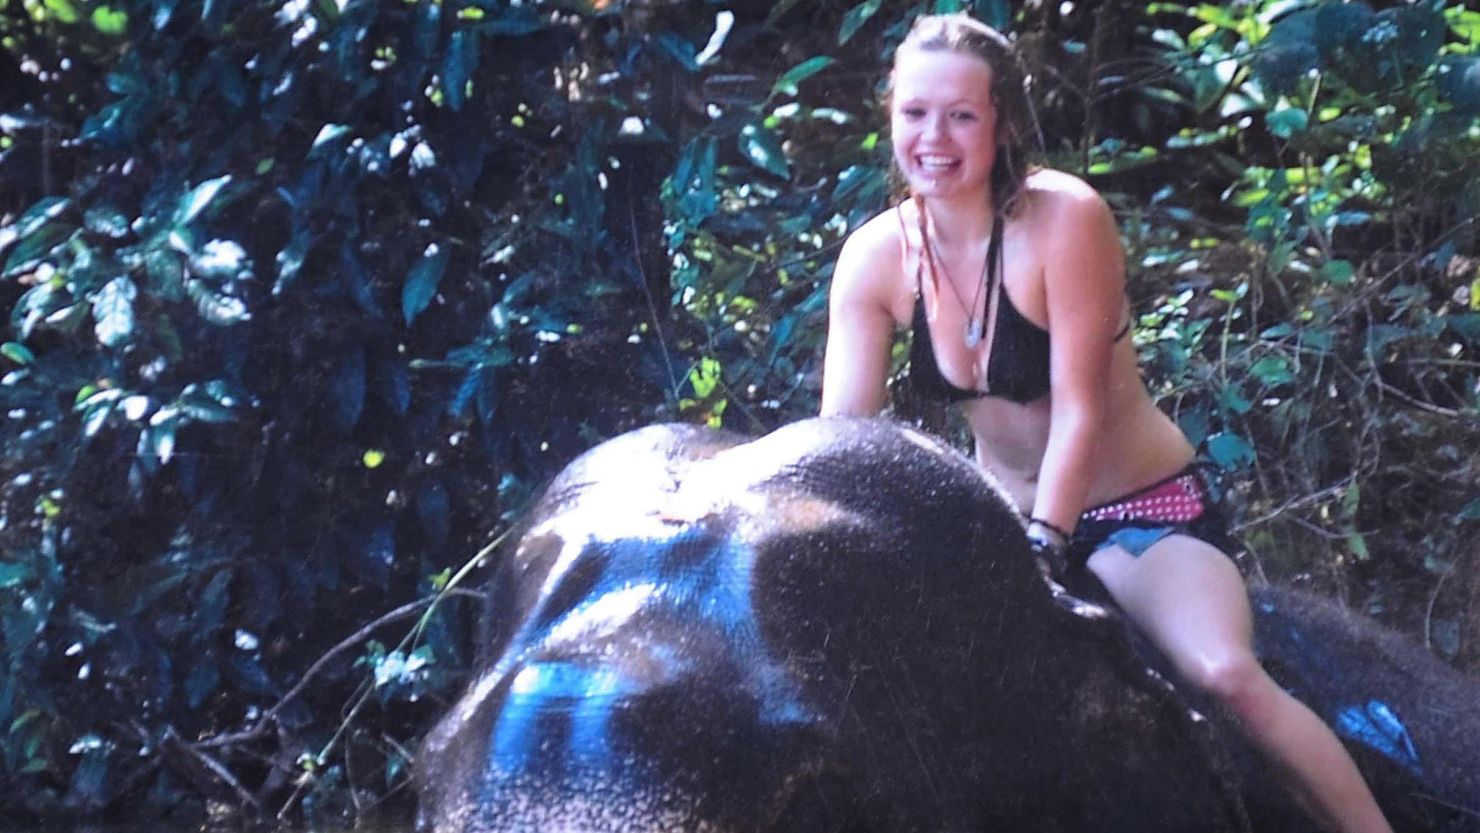 The death of British teenager Scarlett Keeling, 15, in India attracted international attention.